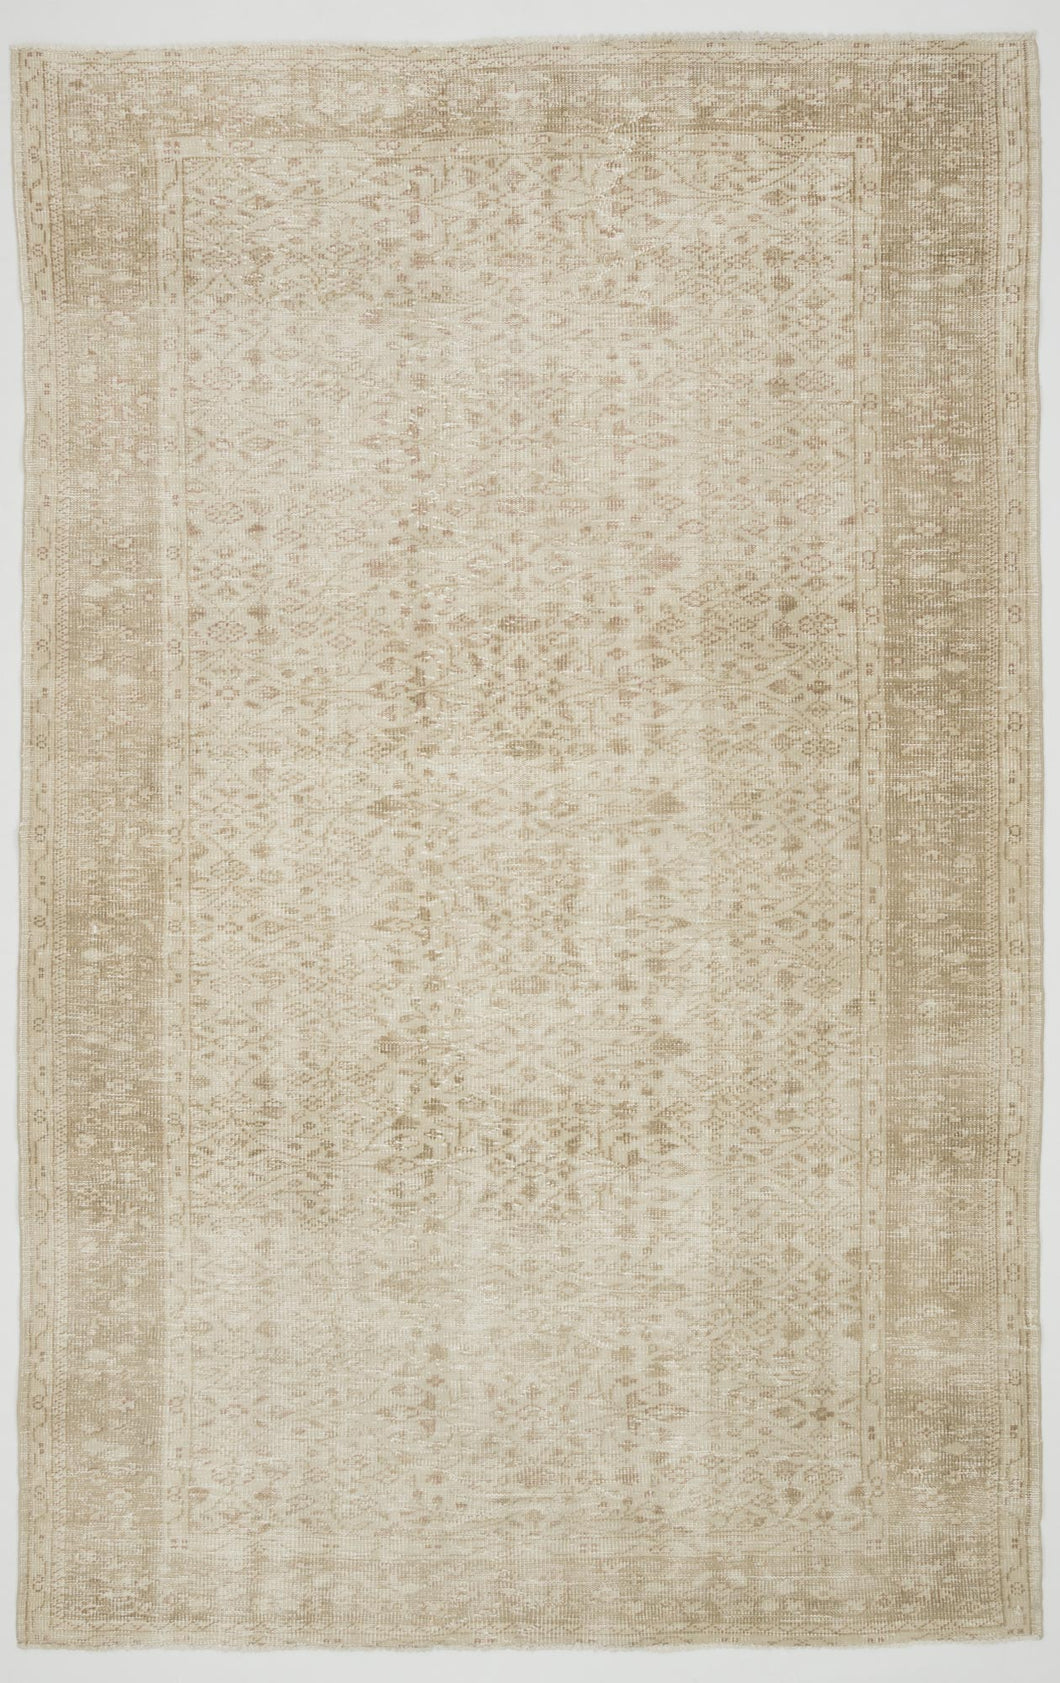 Vintage Turkish Hand-Knotted Area Rug | No. 3